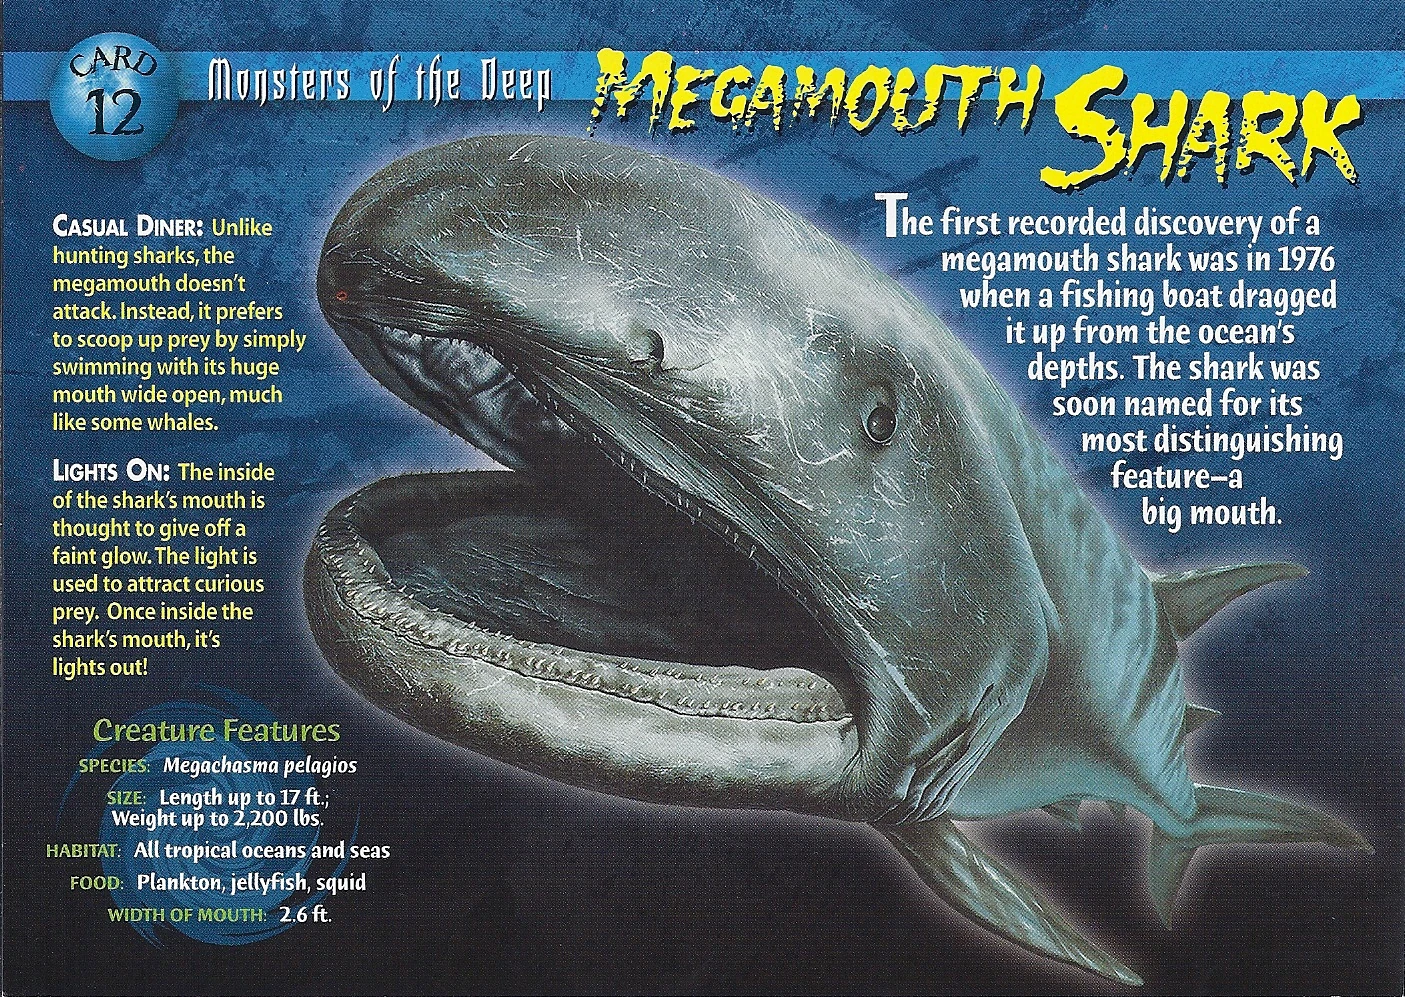 Weird fish of the week: The Mega-mouth shark - Practical Fishkeeping